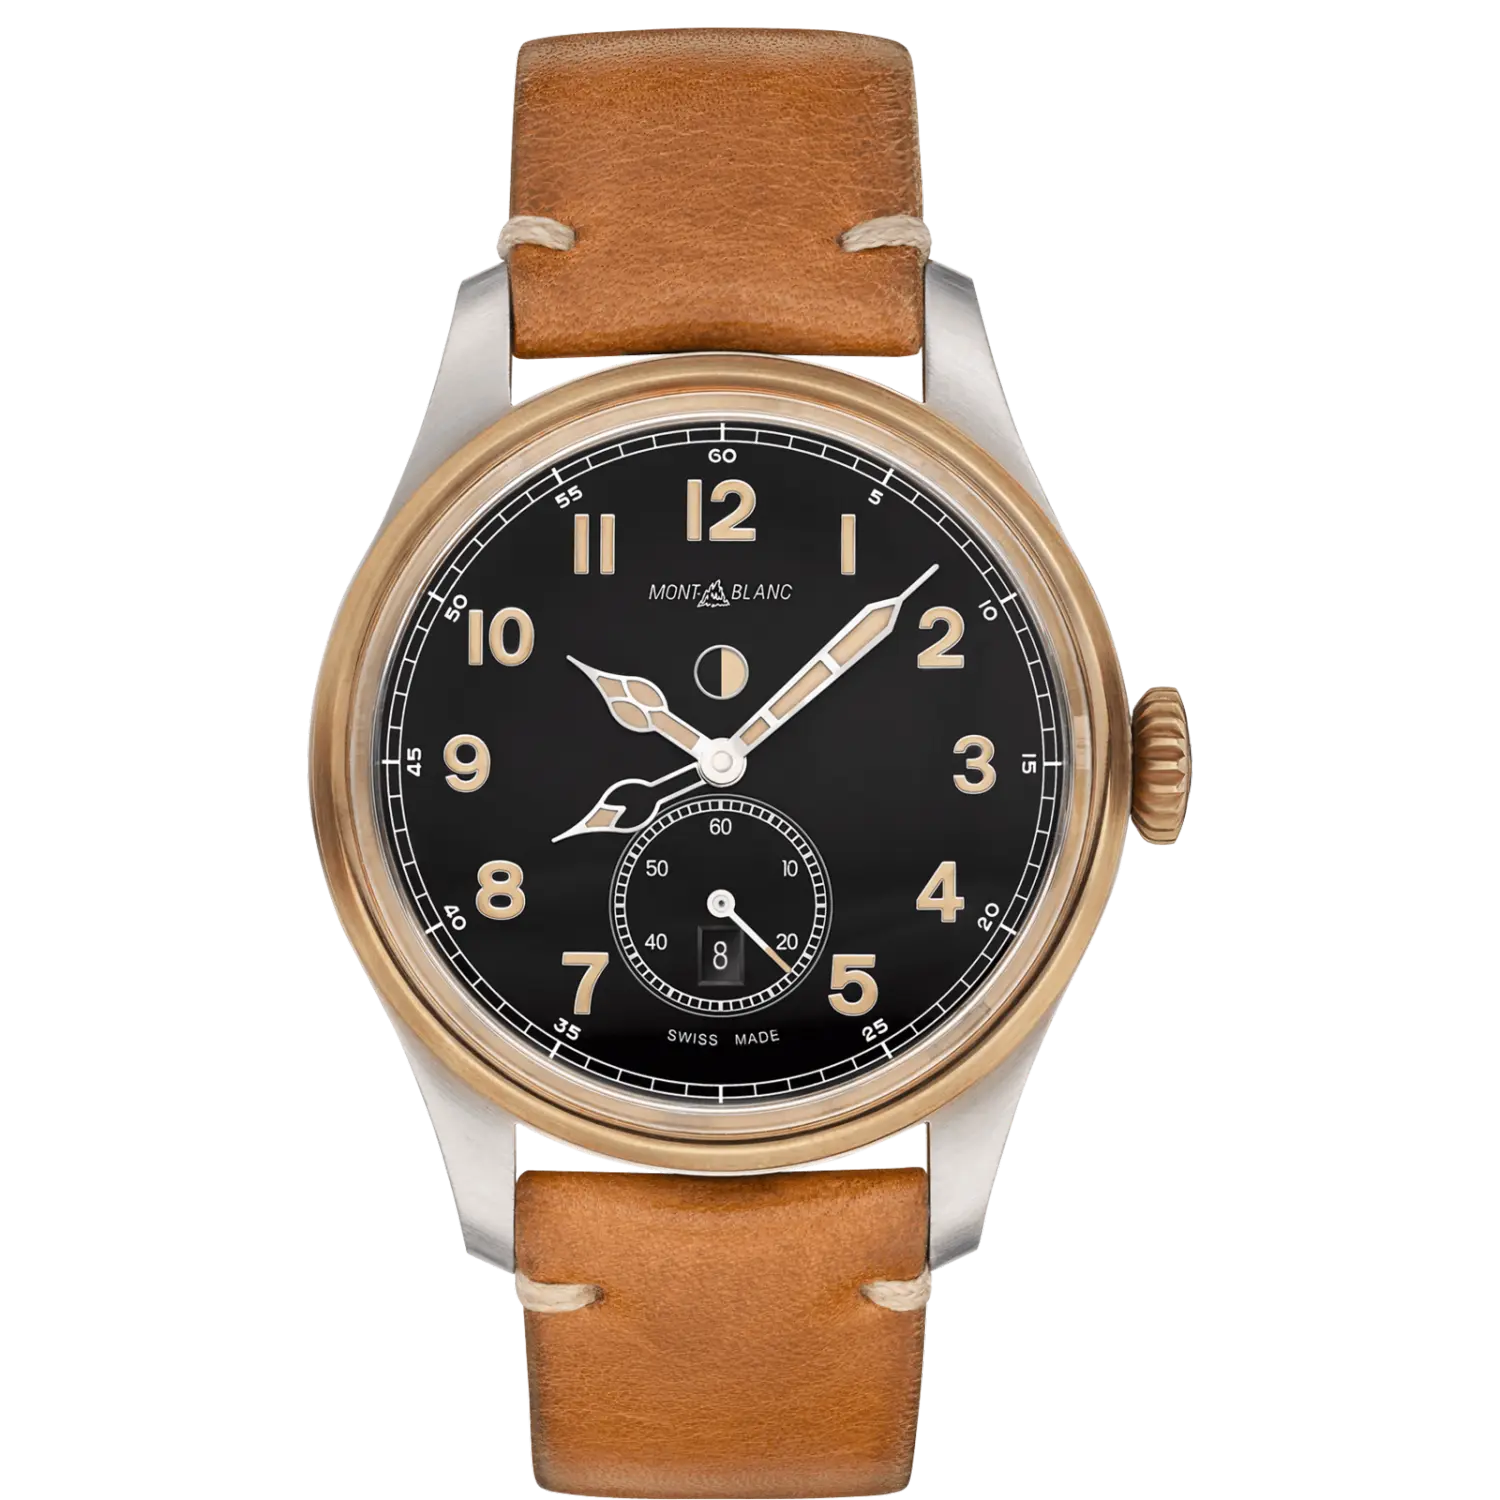 Montblance 1858 Automatic men’s watch with a dual time display